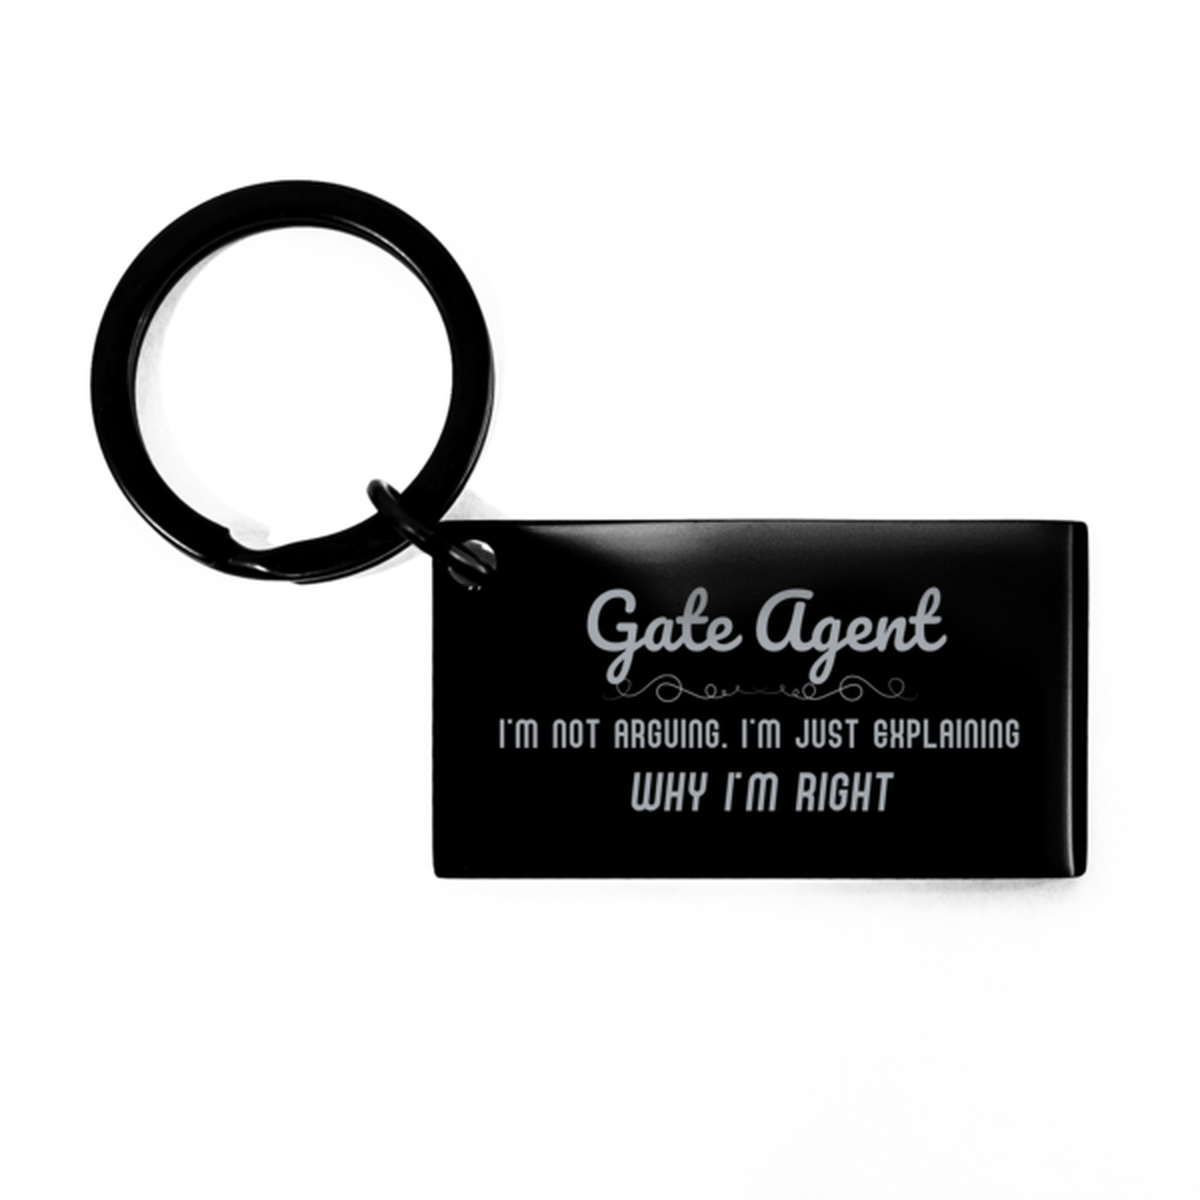 Gate Agent I'm not Arguing. I'm Just Explaining Why I'm RIGHT Keychain, Funny Saying Quote Gate Agent Gifts For Gate Agent Graduation Birthday Christmas Gifts for Men Women Coworker